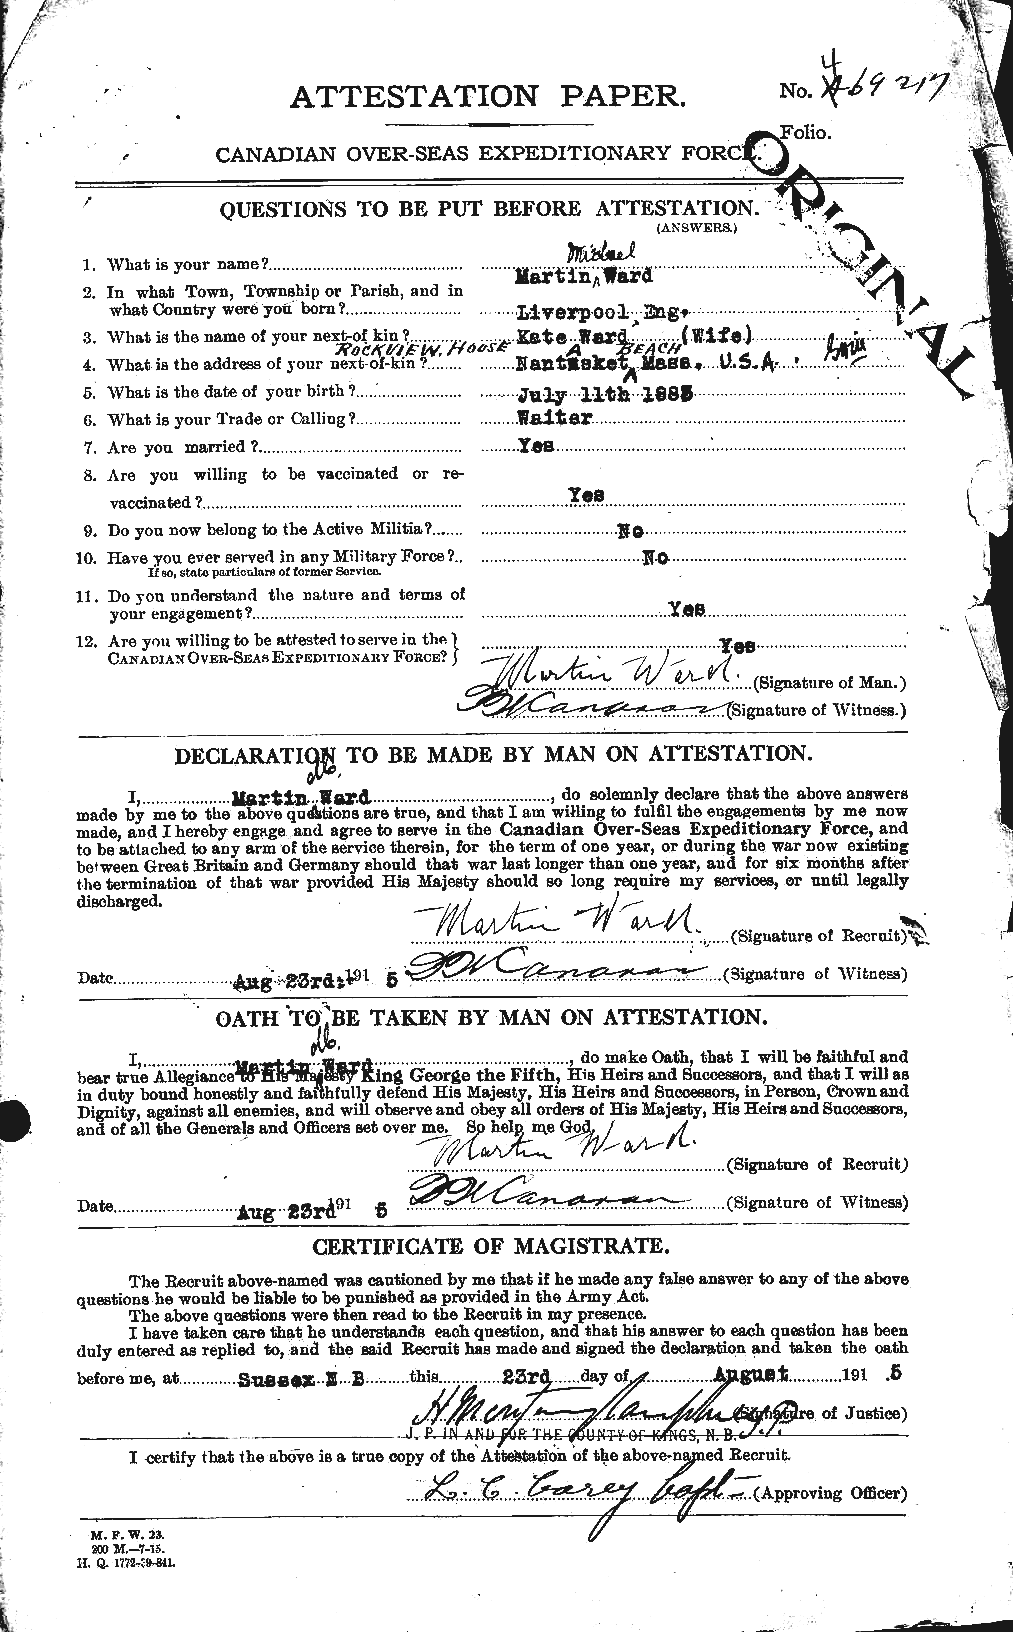 Personnel Records of the First World War - CEF 659598a